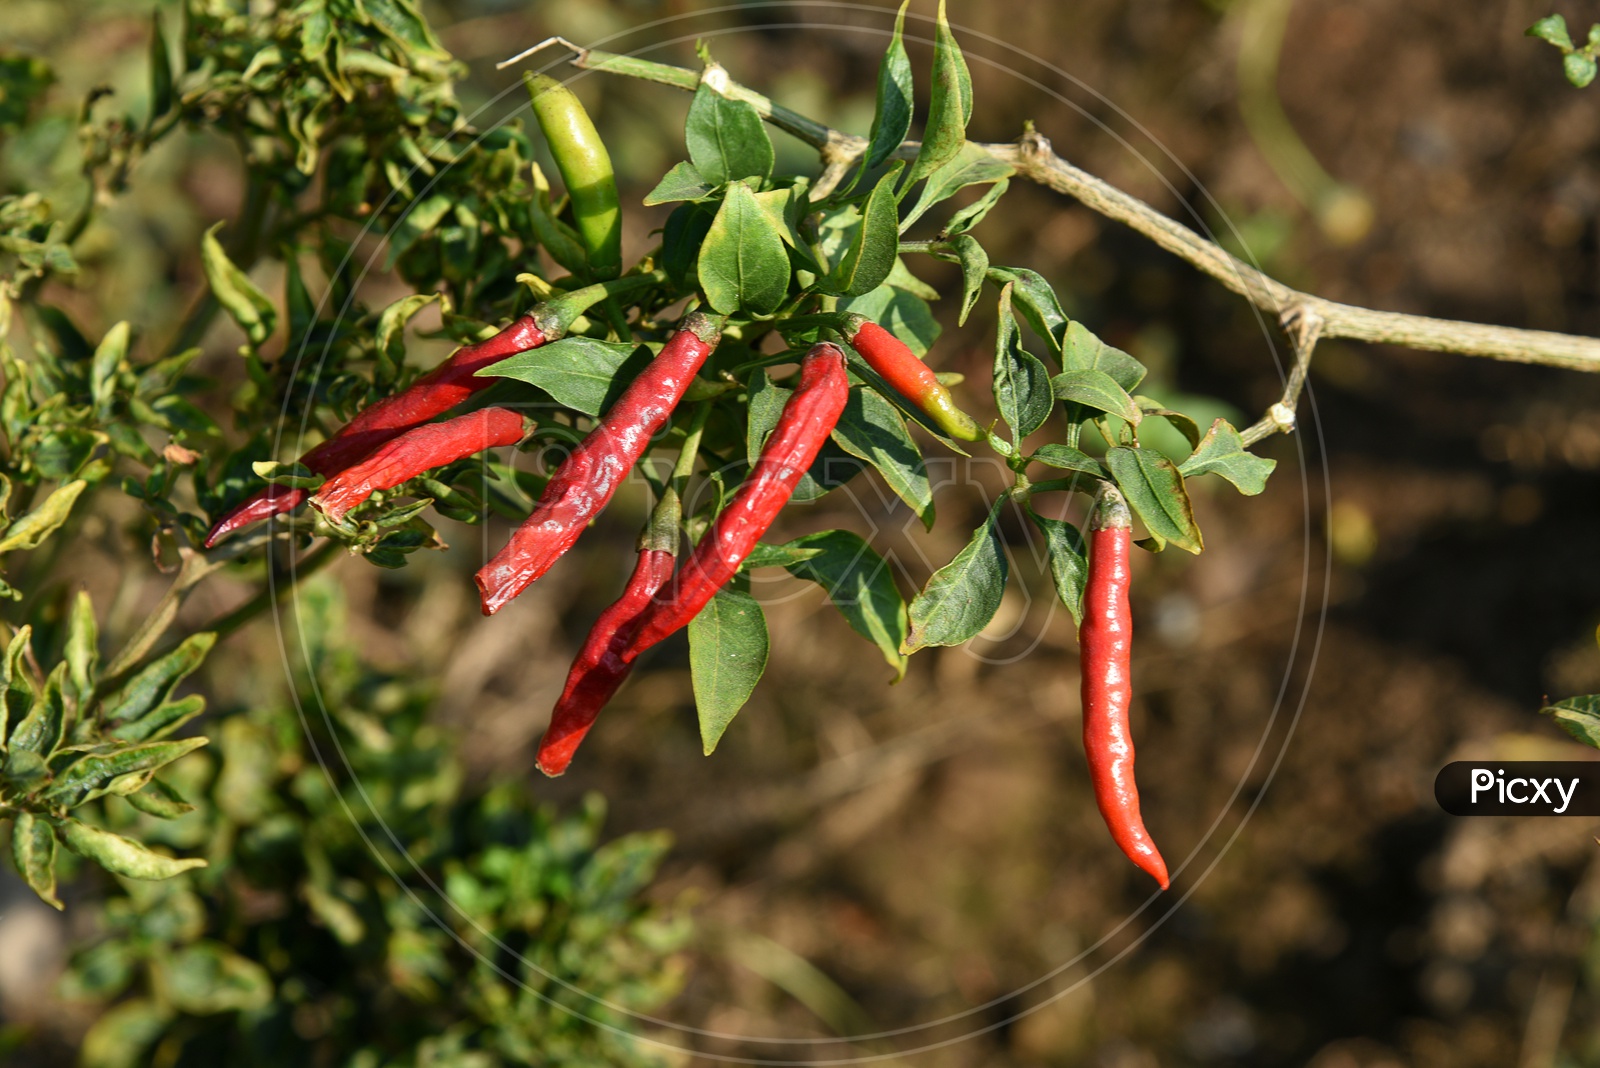 Red  Organic Chili Pepper Growing on Plants In an Organic Farm Or Agricultural Farm